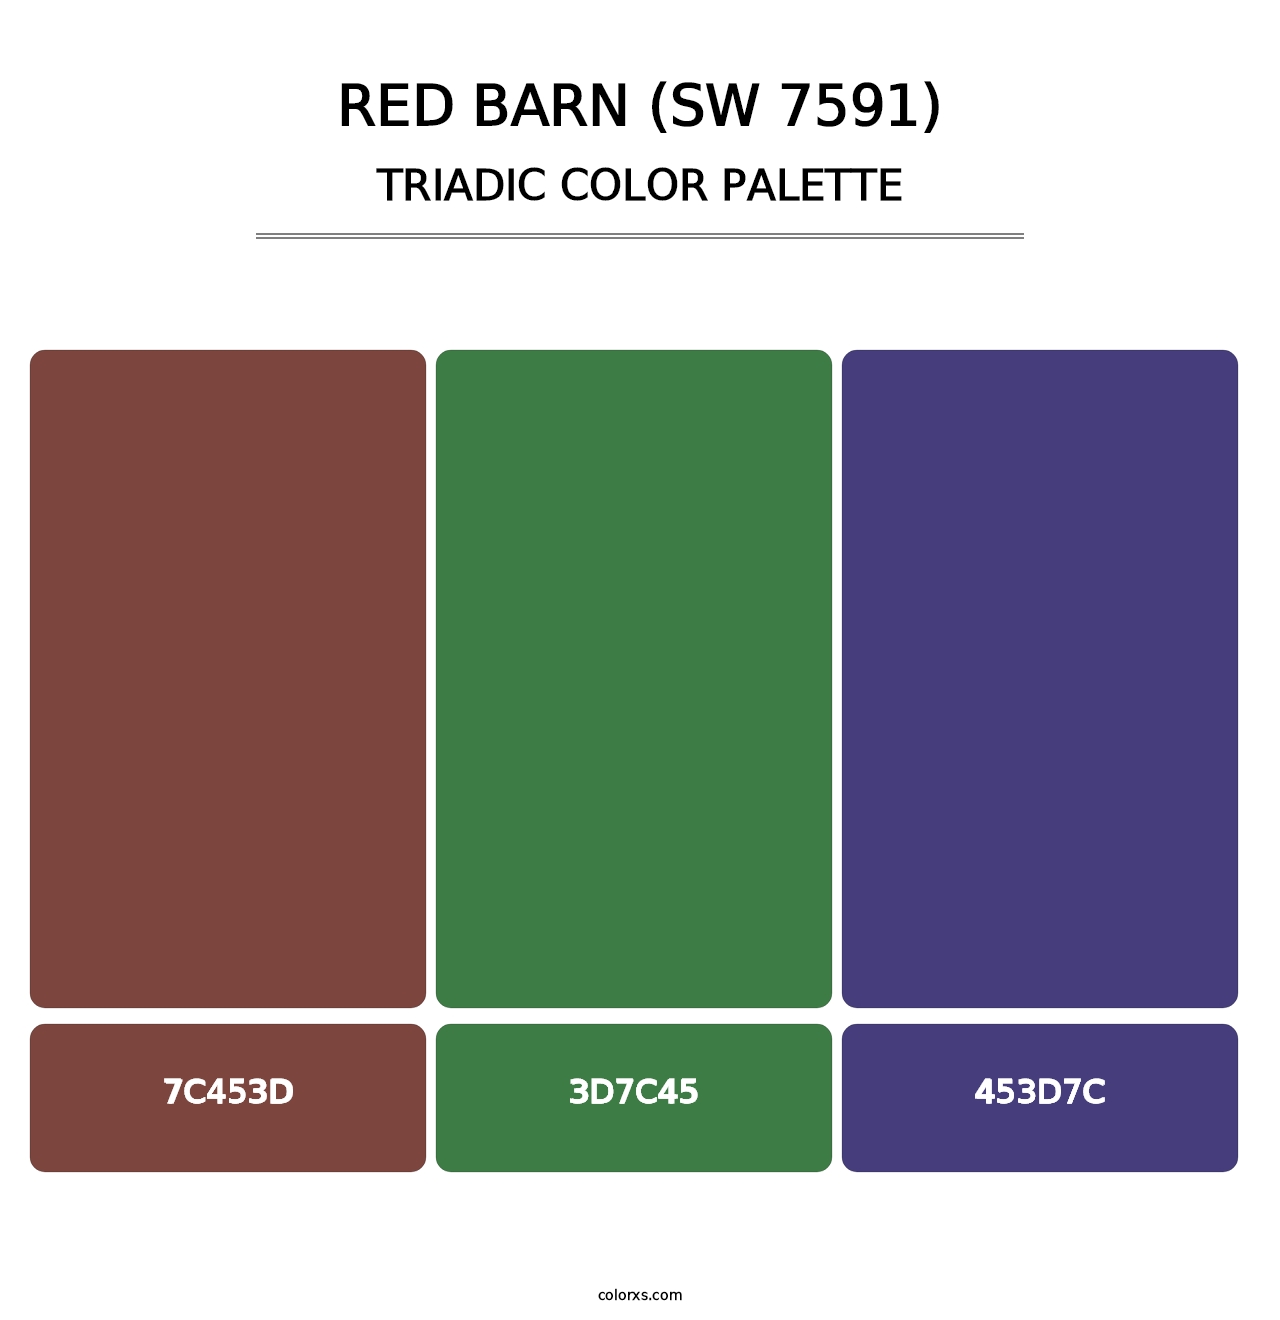 Red Barn (SW 7591) - Triadic Color Palette